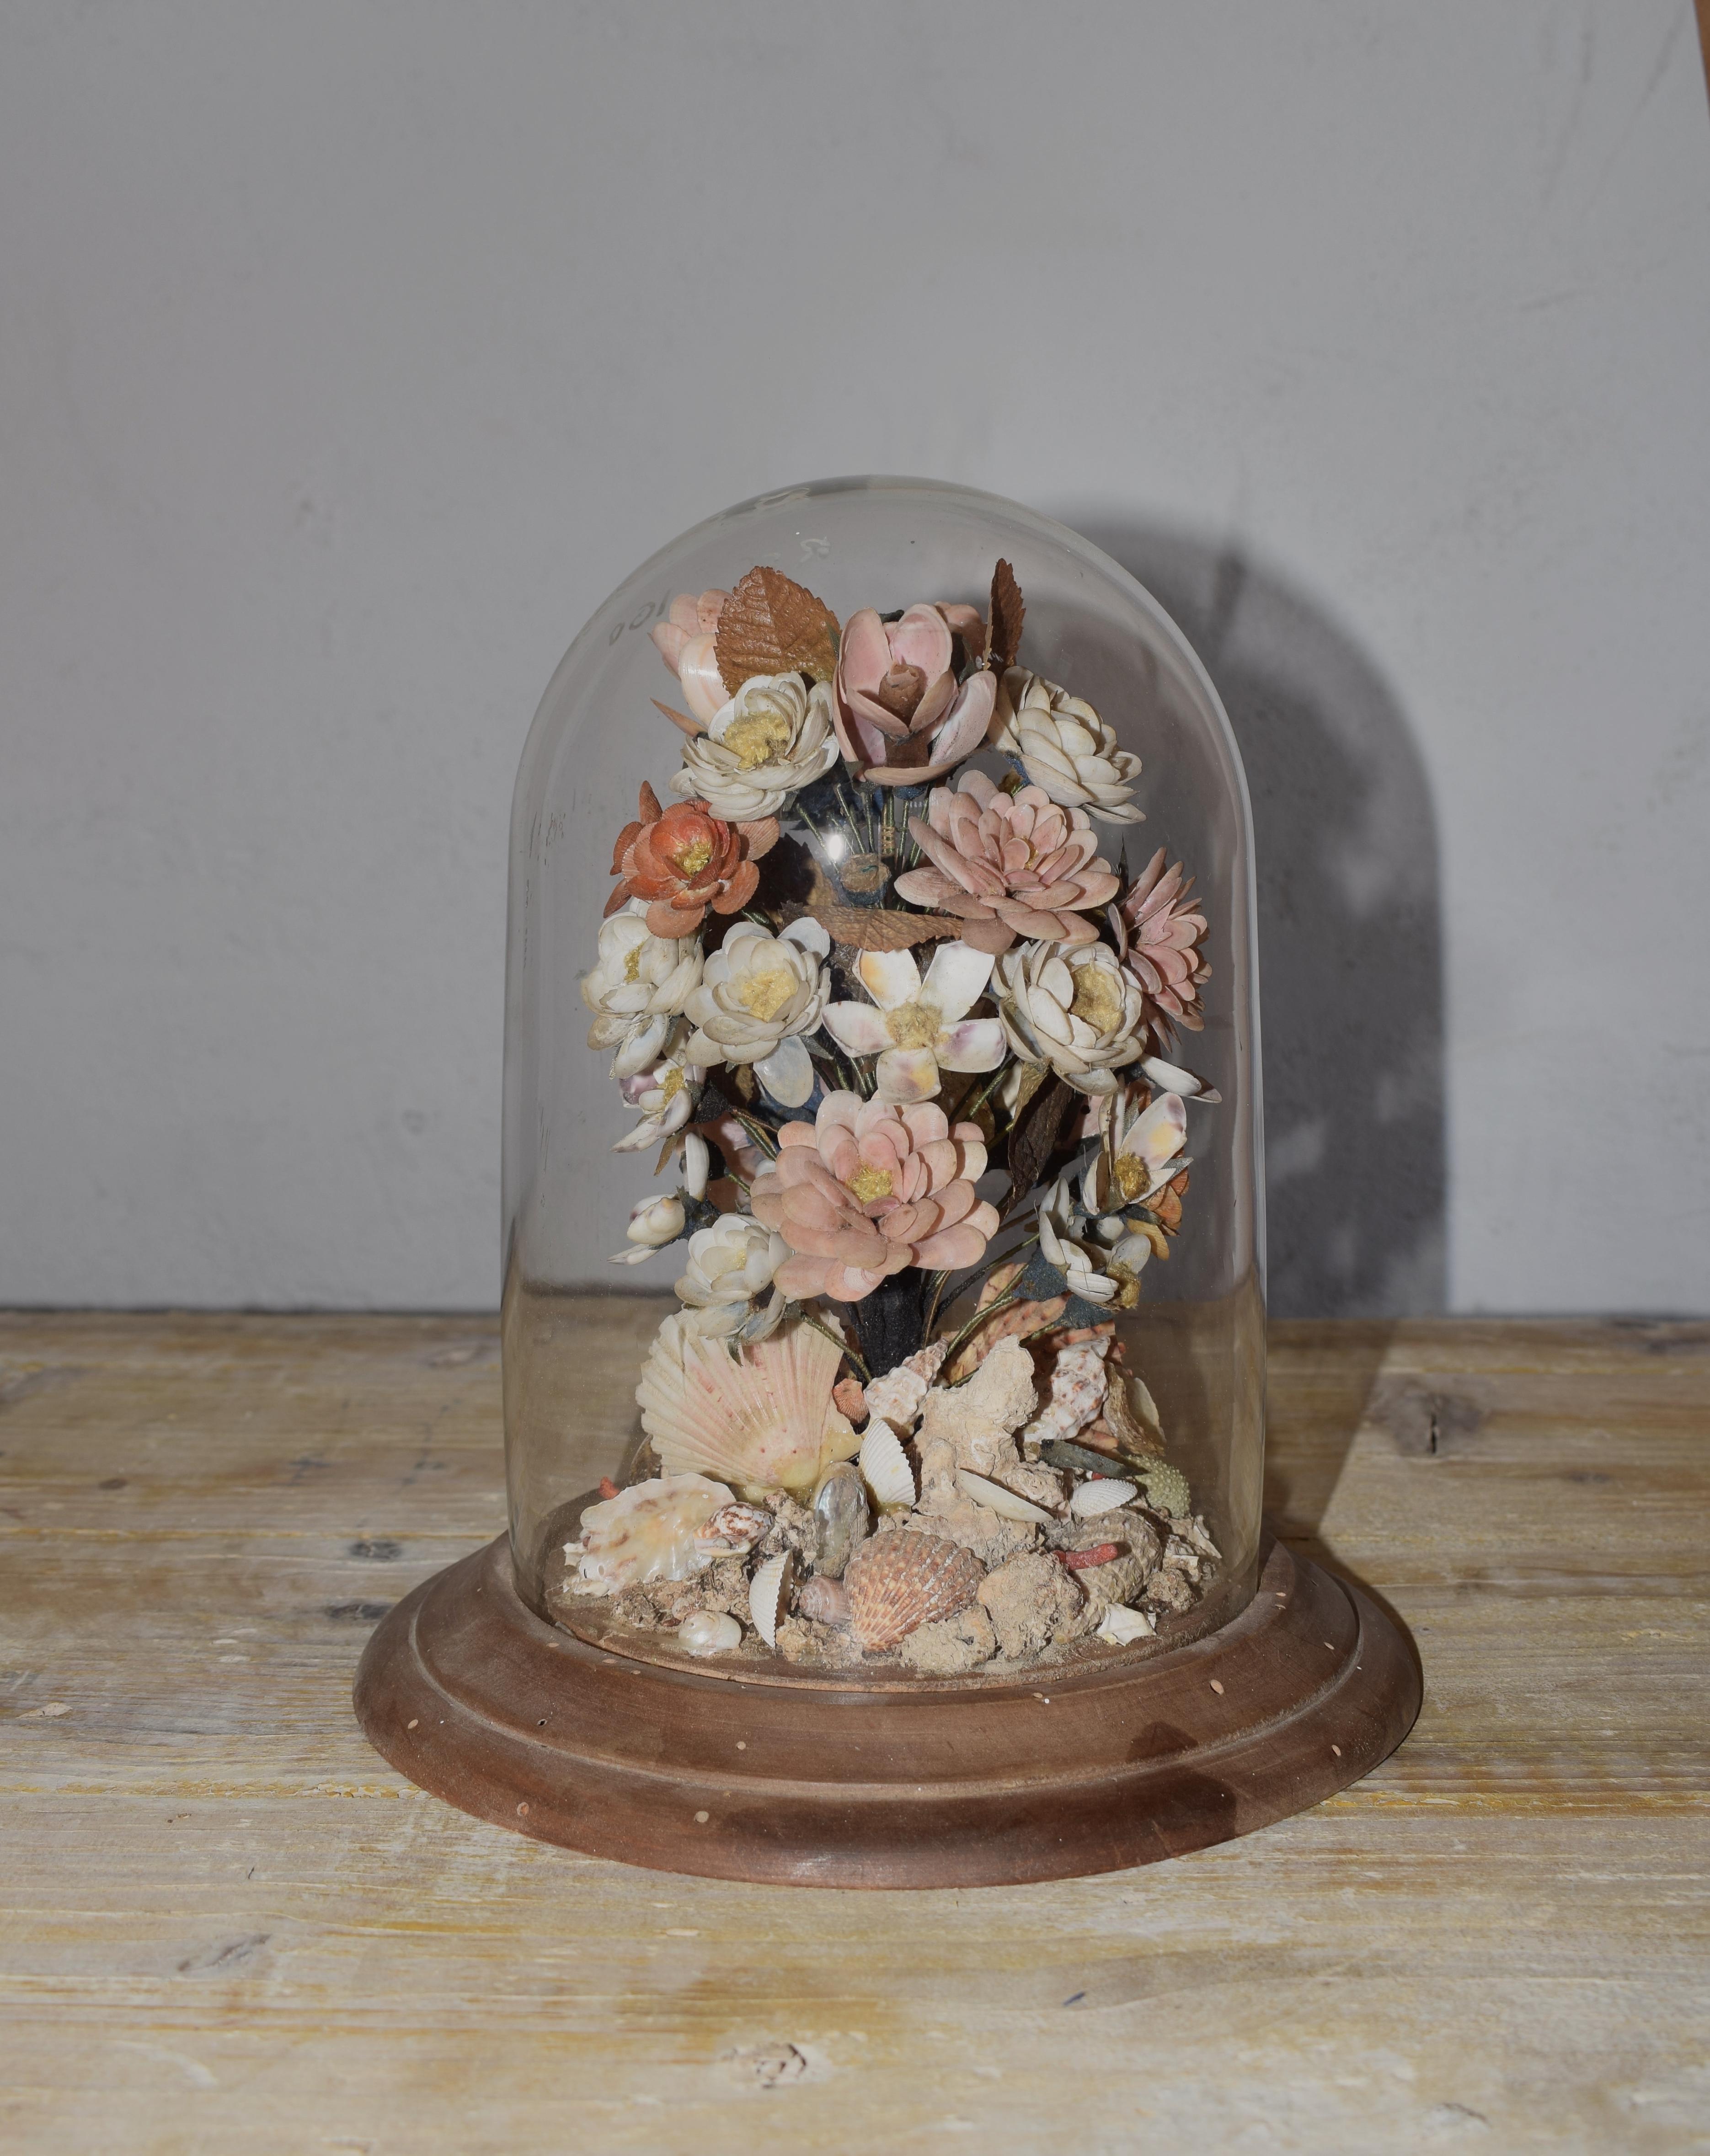 A wedding bouquet seashells bouquet also known as ´Sailors Valentines´. These works of art are made principally of hundreds of tiny seashells with some crustaceans. This floral decoration is covered in a large elongated glass dome whilst the flowers